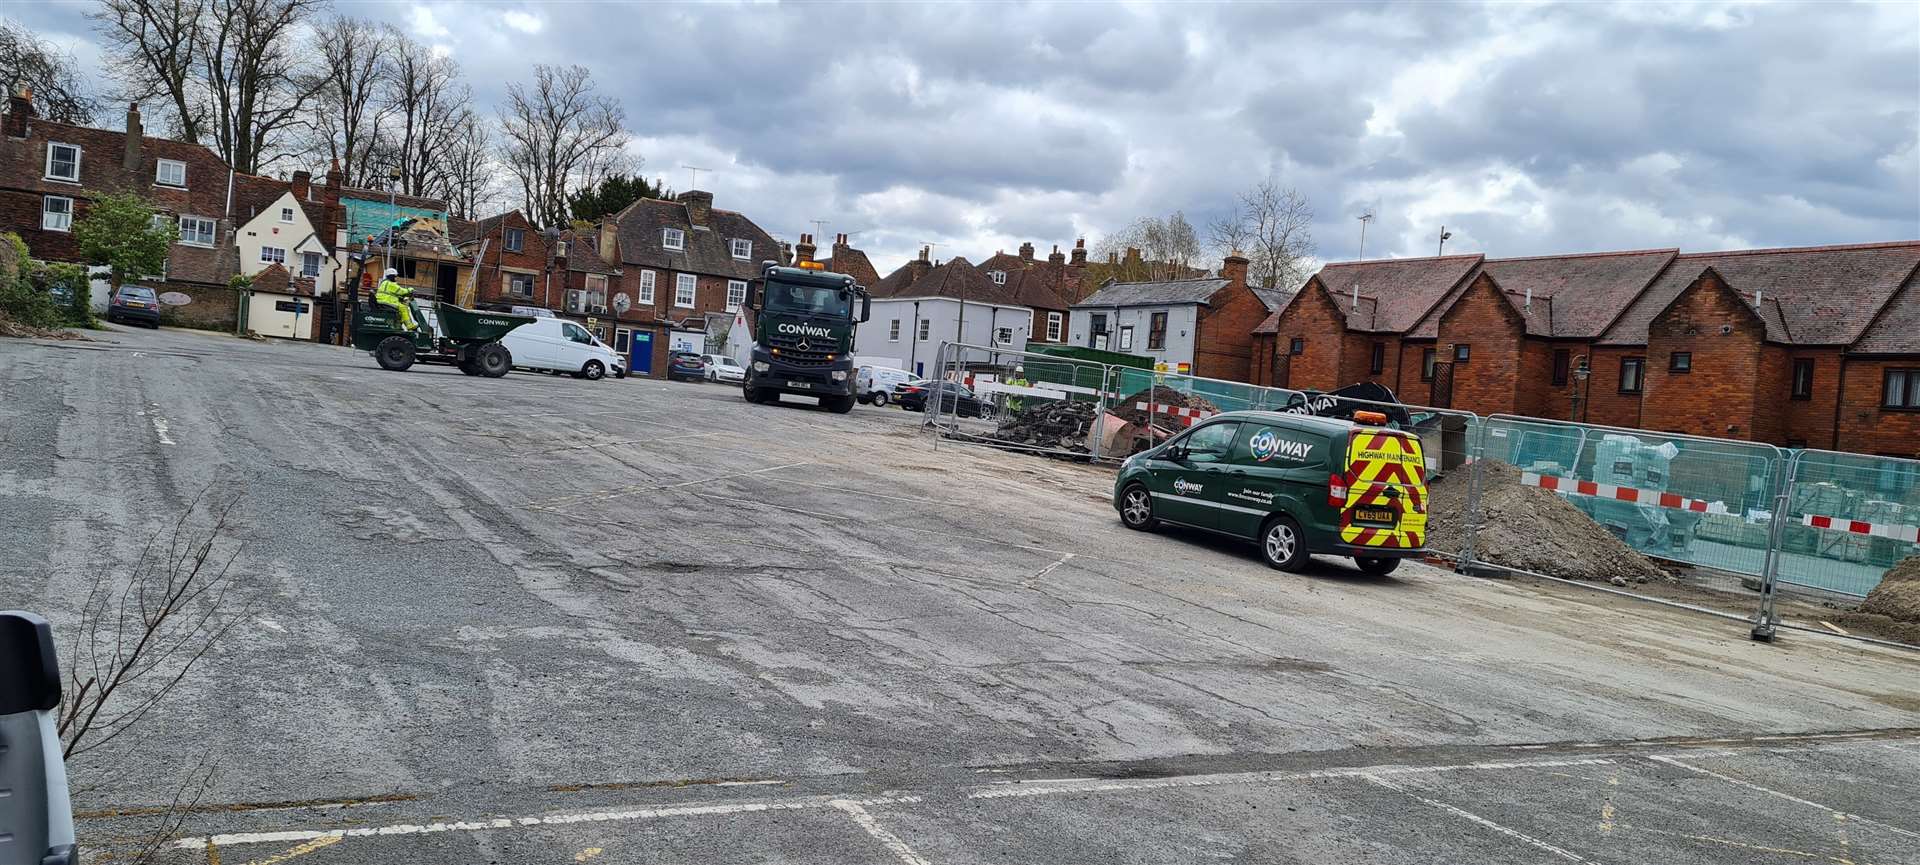 Rosemary Lane car park as it looks now. It is set to be sold off for housing